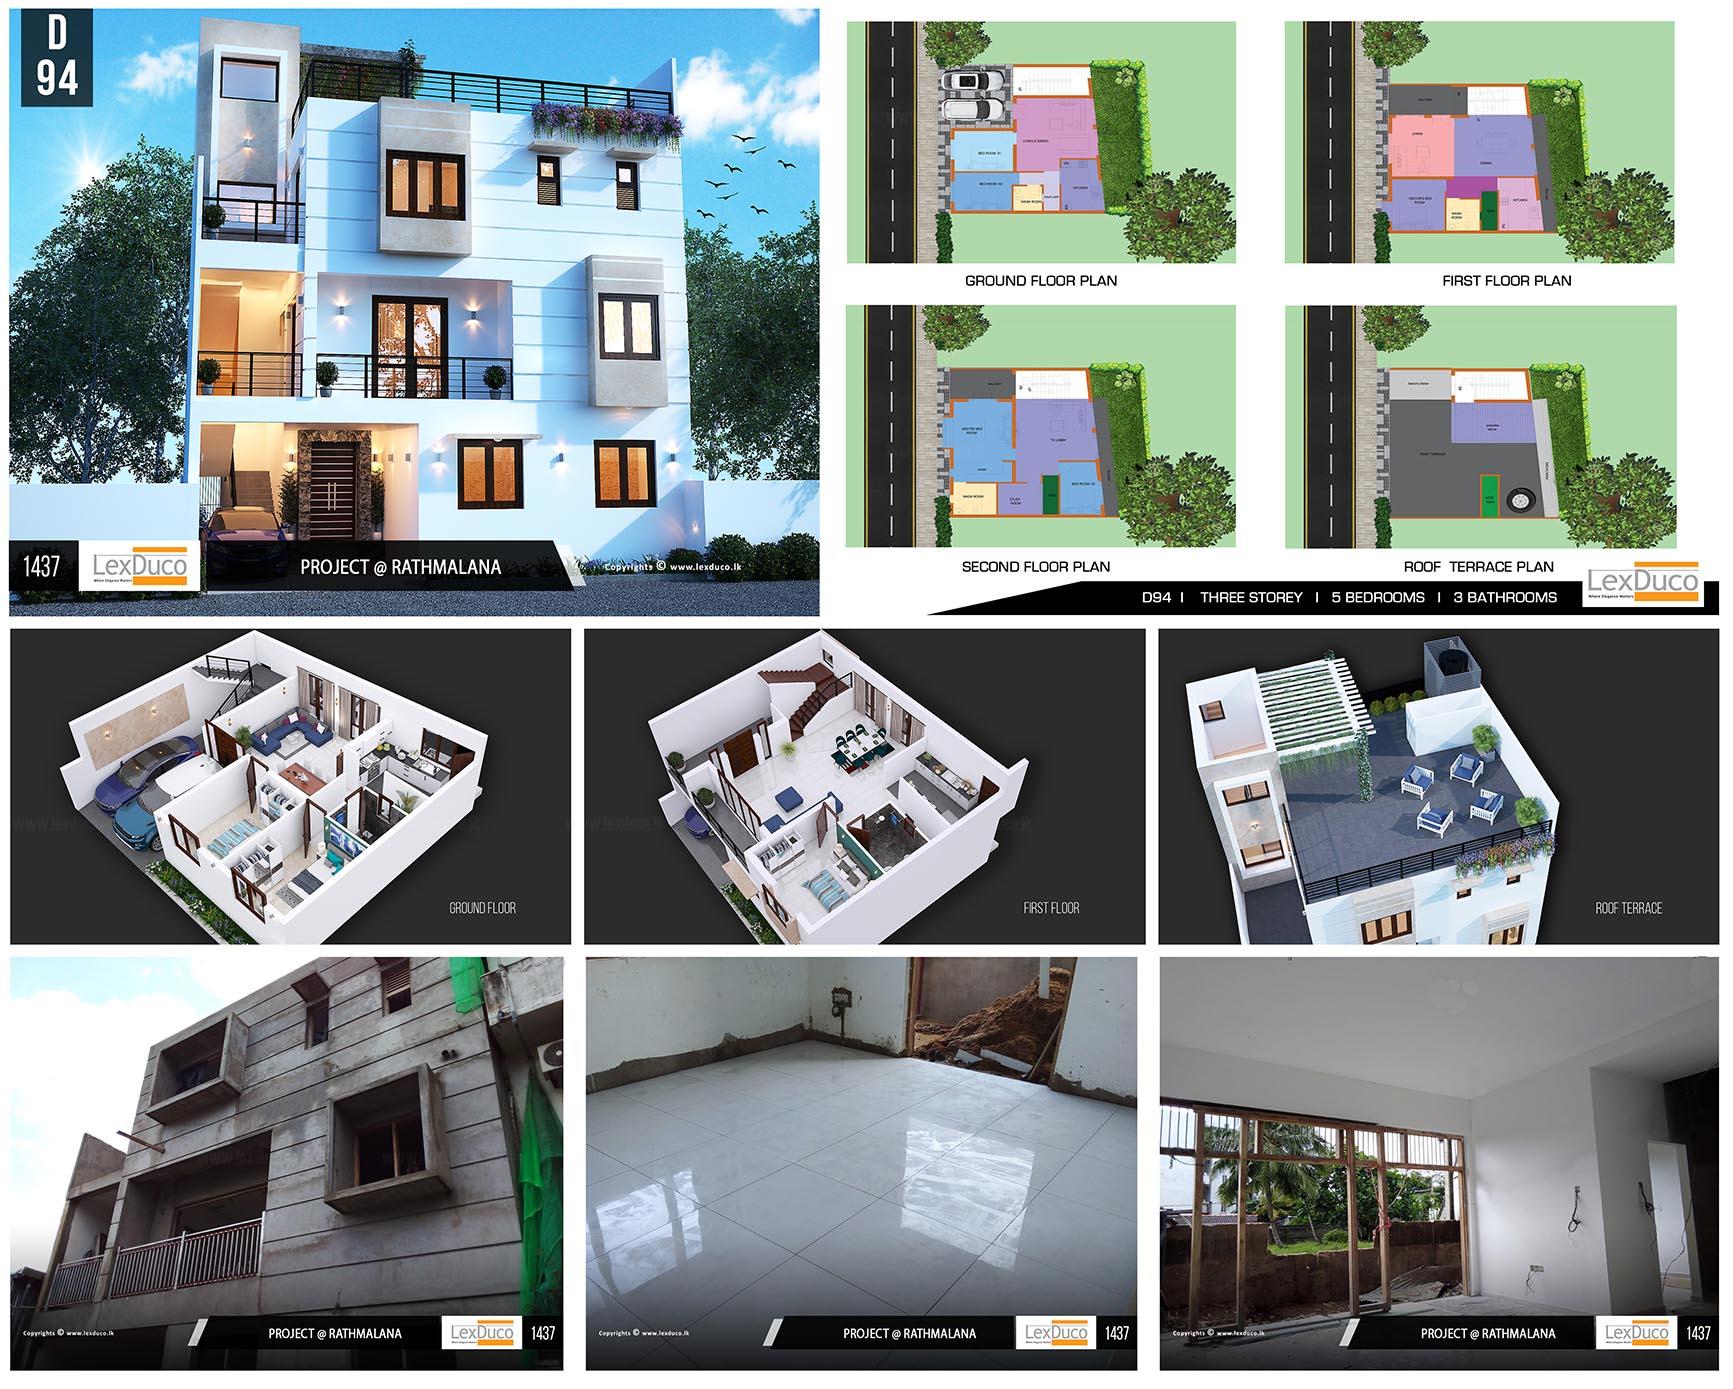 Residential Housing Project at Rathmalana | Lex Duco